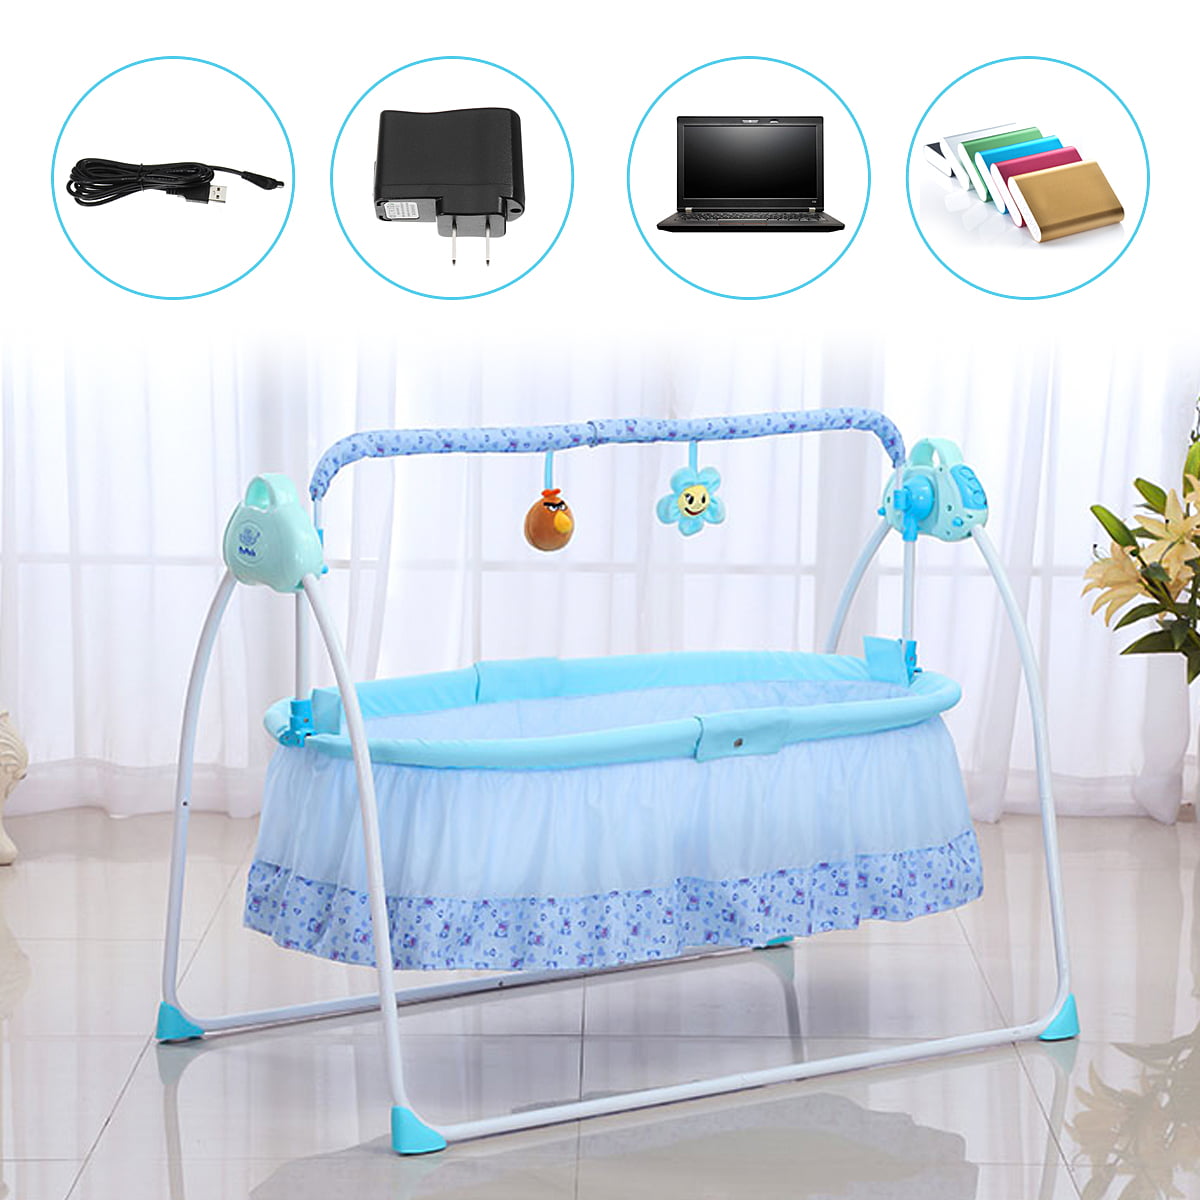 Mat Electric Auto-Swing Big Bed Baby Cradle Space Safe Crib Infant Rocker Cot 